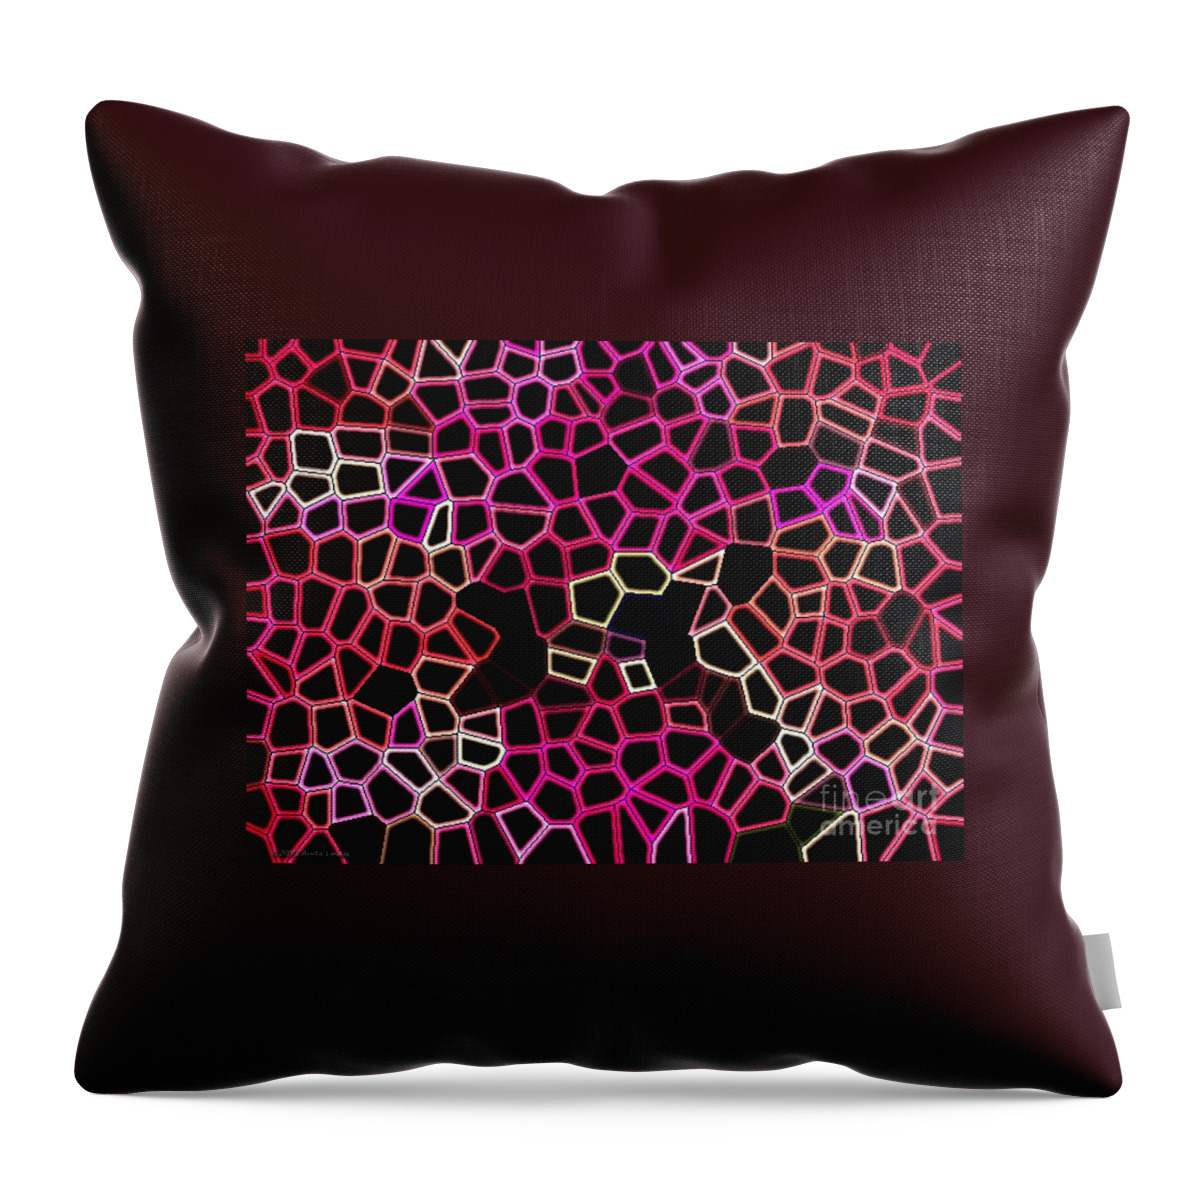 Neon Pink Cells Throw Pillow featuring the photograph Neon Pink Cells by Anita Lewis